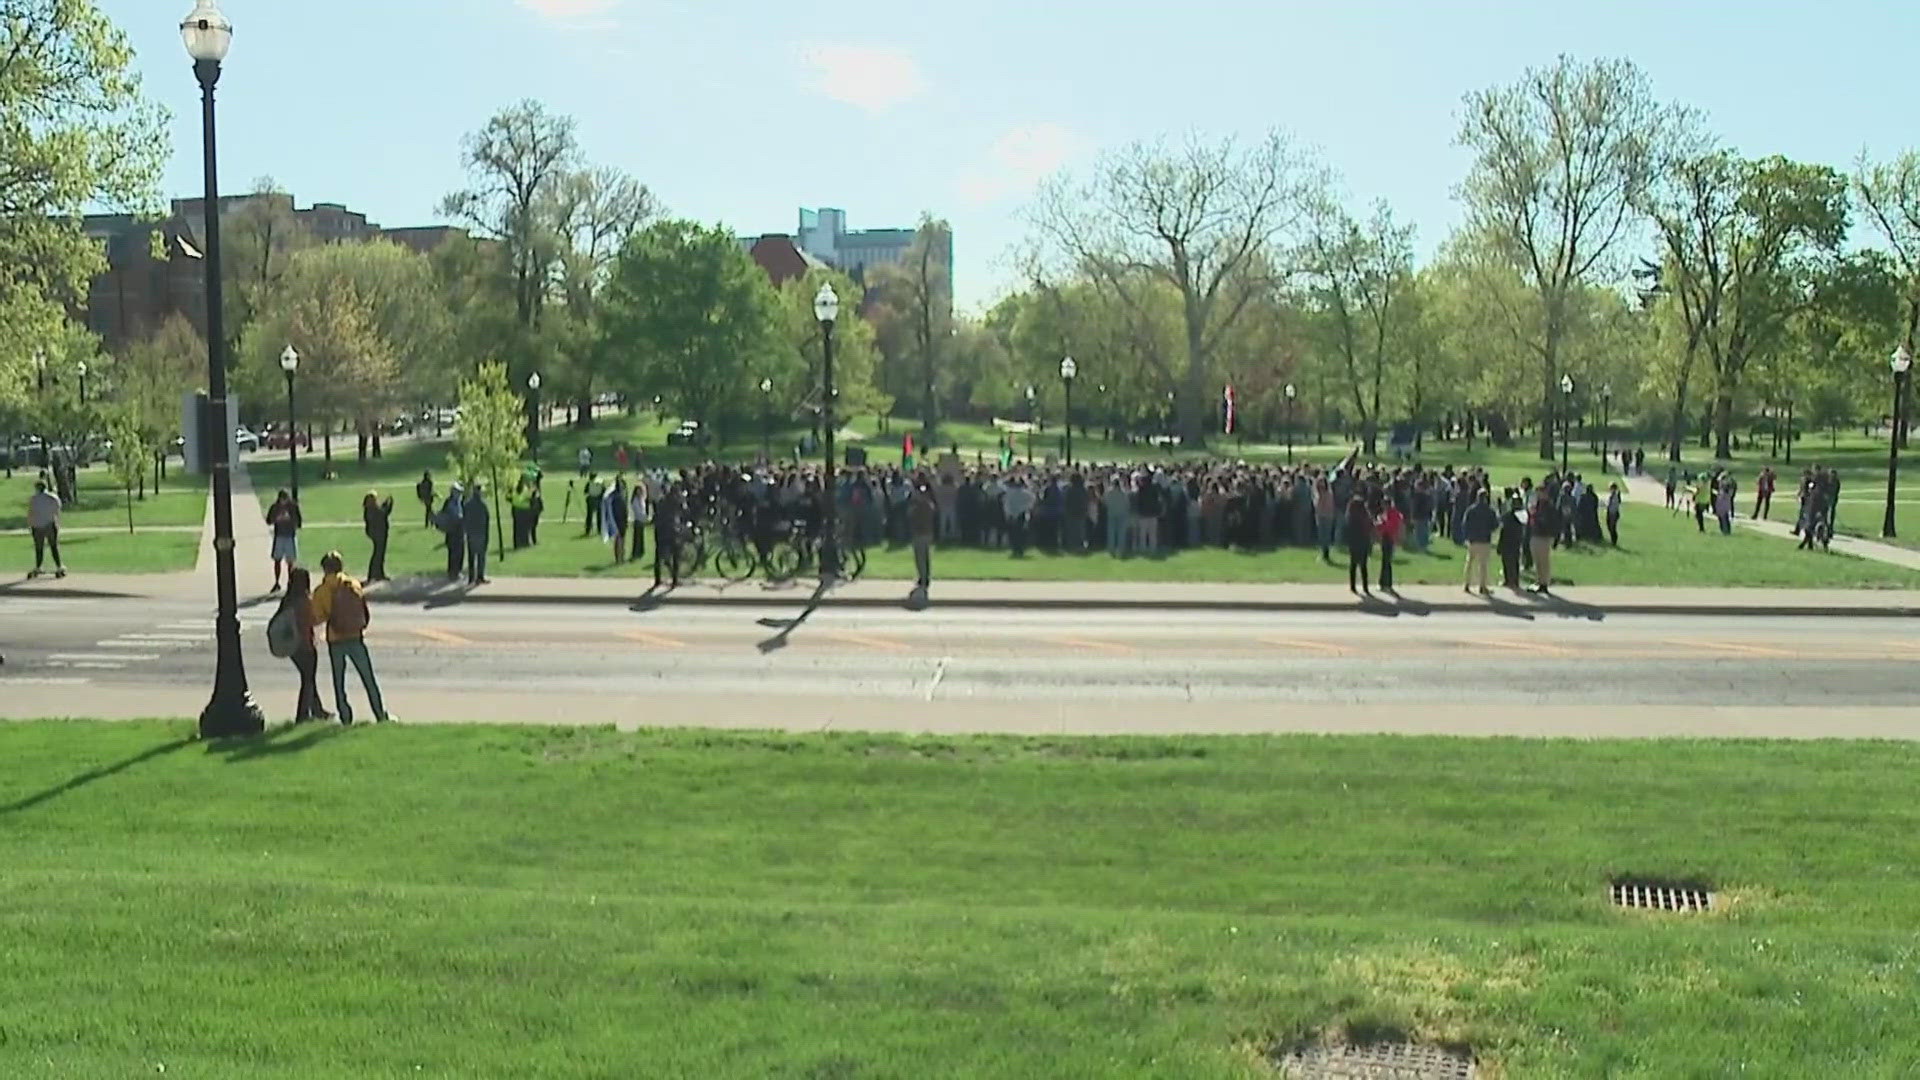 At least five people have been arrested during protests on campus in the last two days.